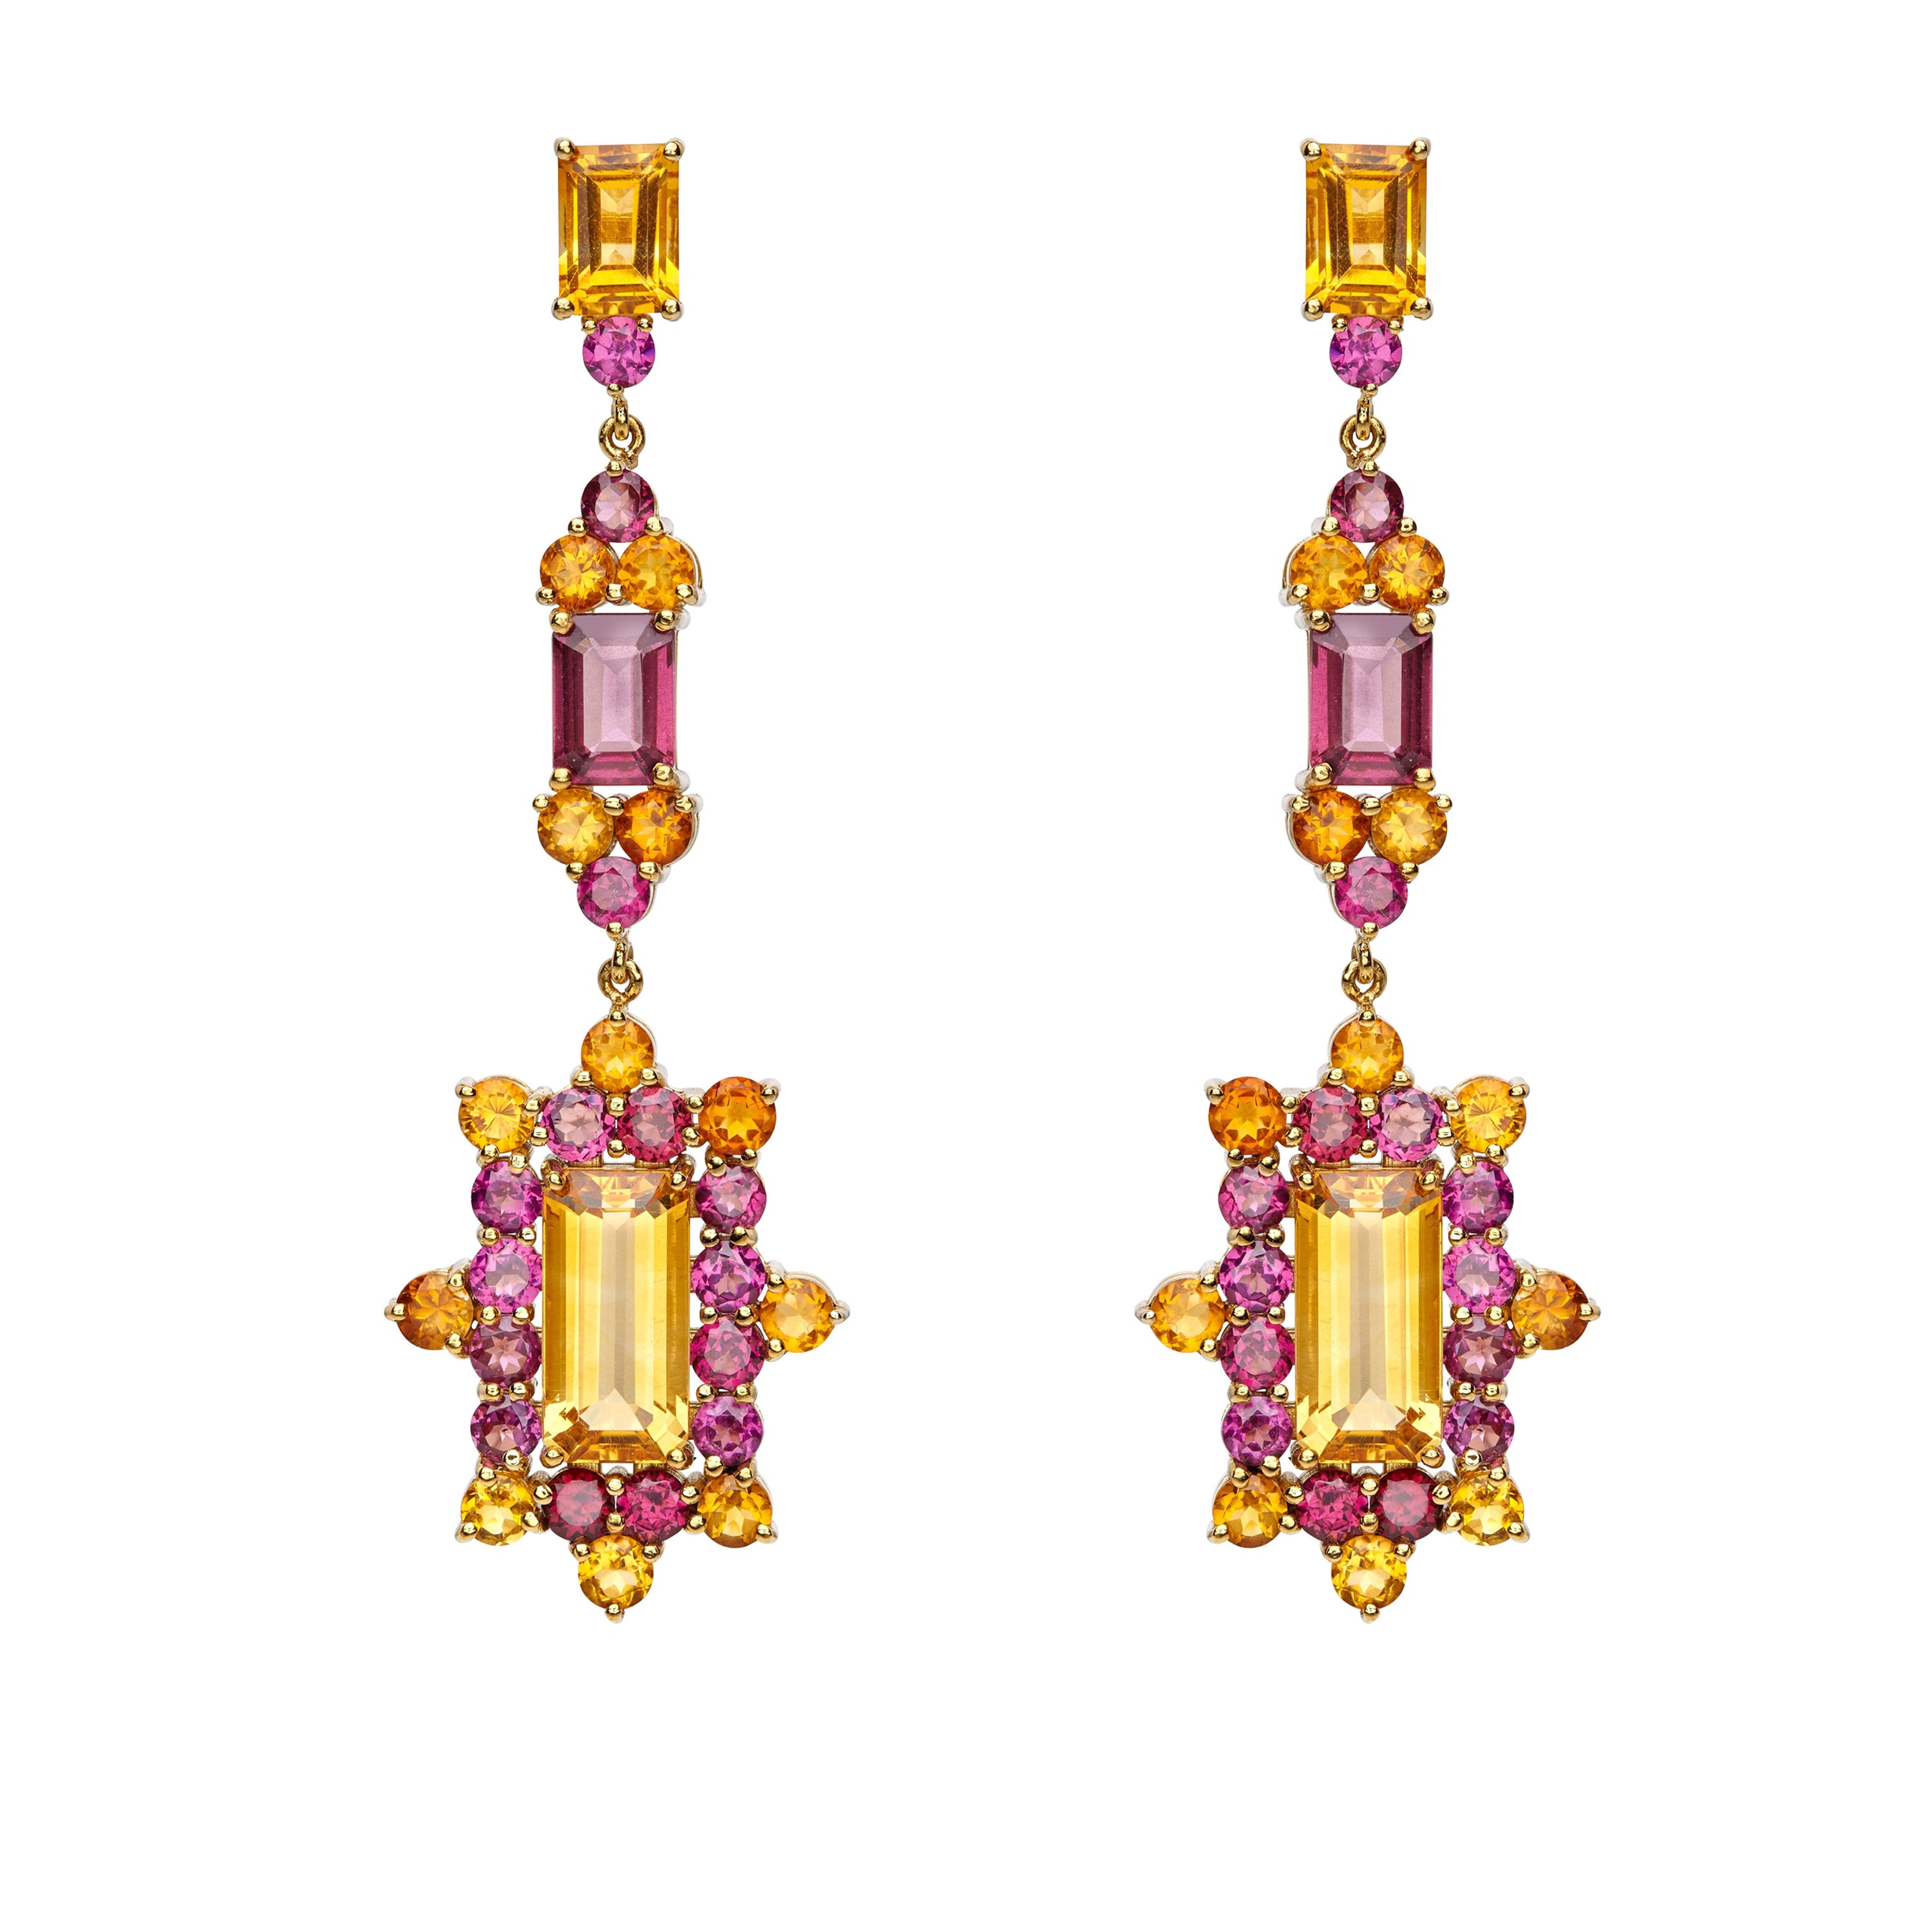 Long Dange Earrings Chandelier 18kt Yellow Gold with Red Rhodolite and Citrine